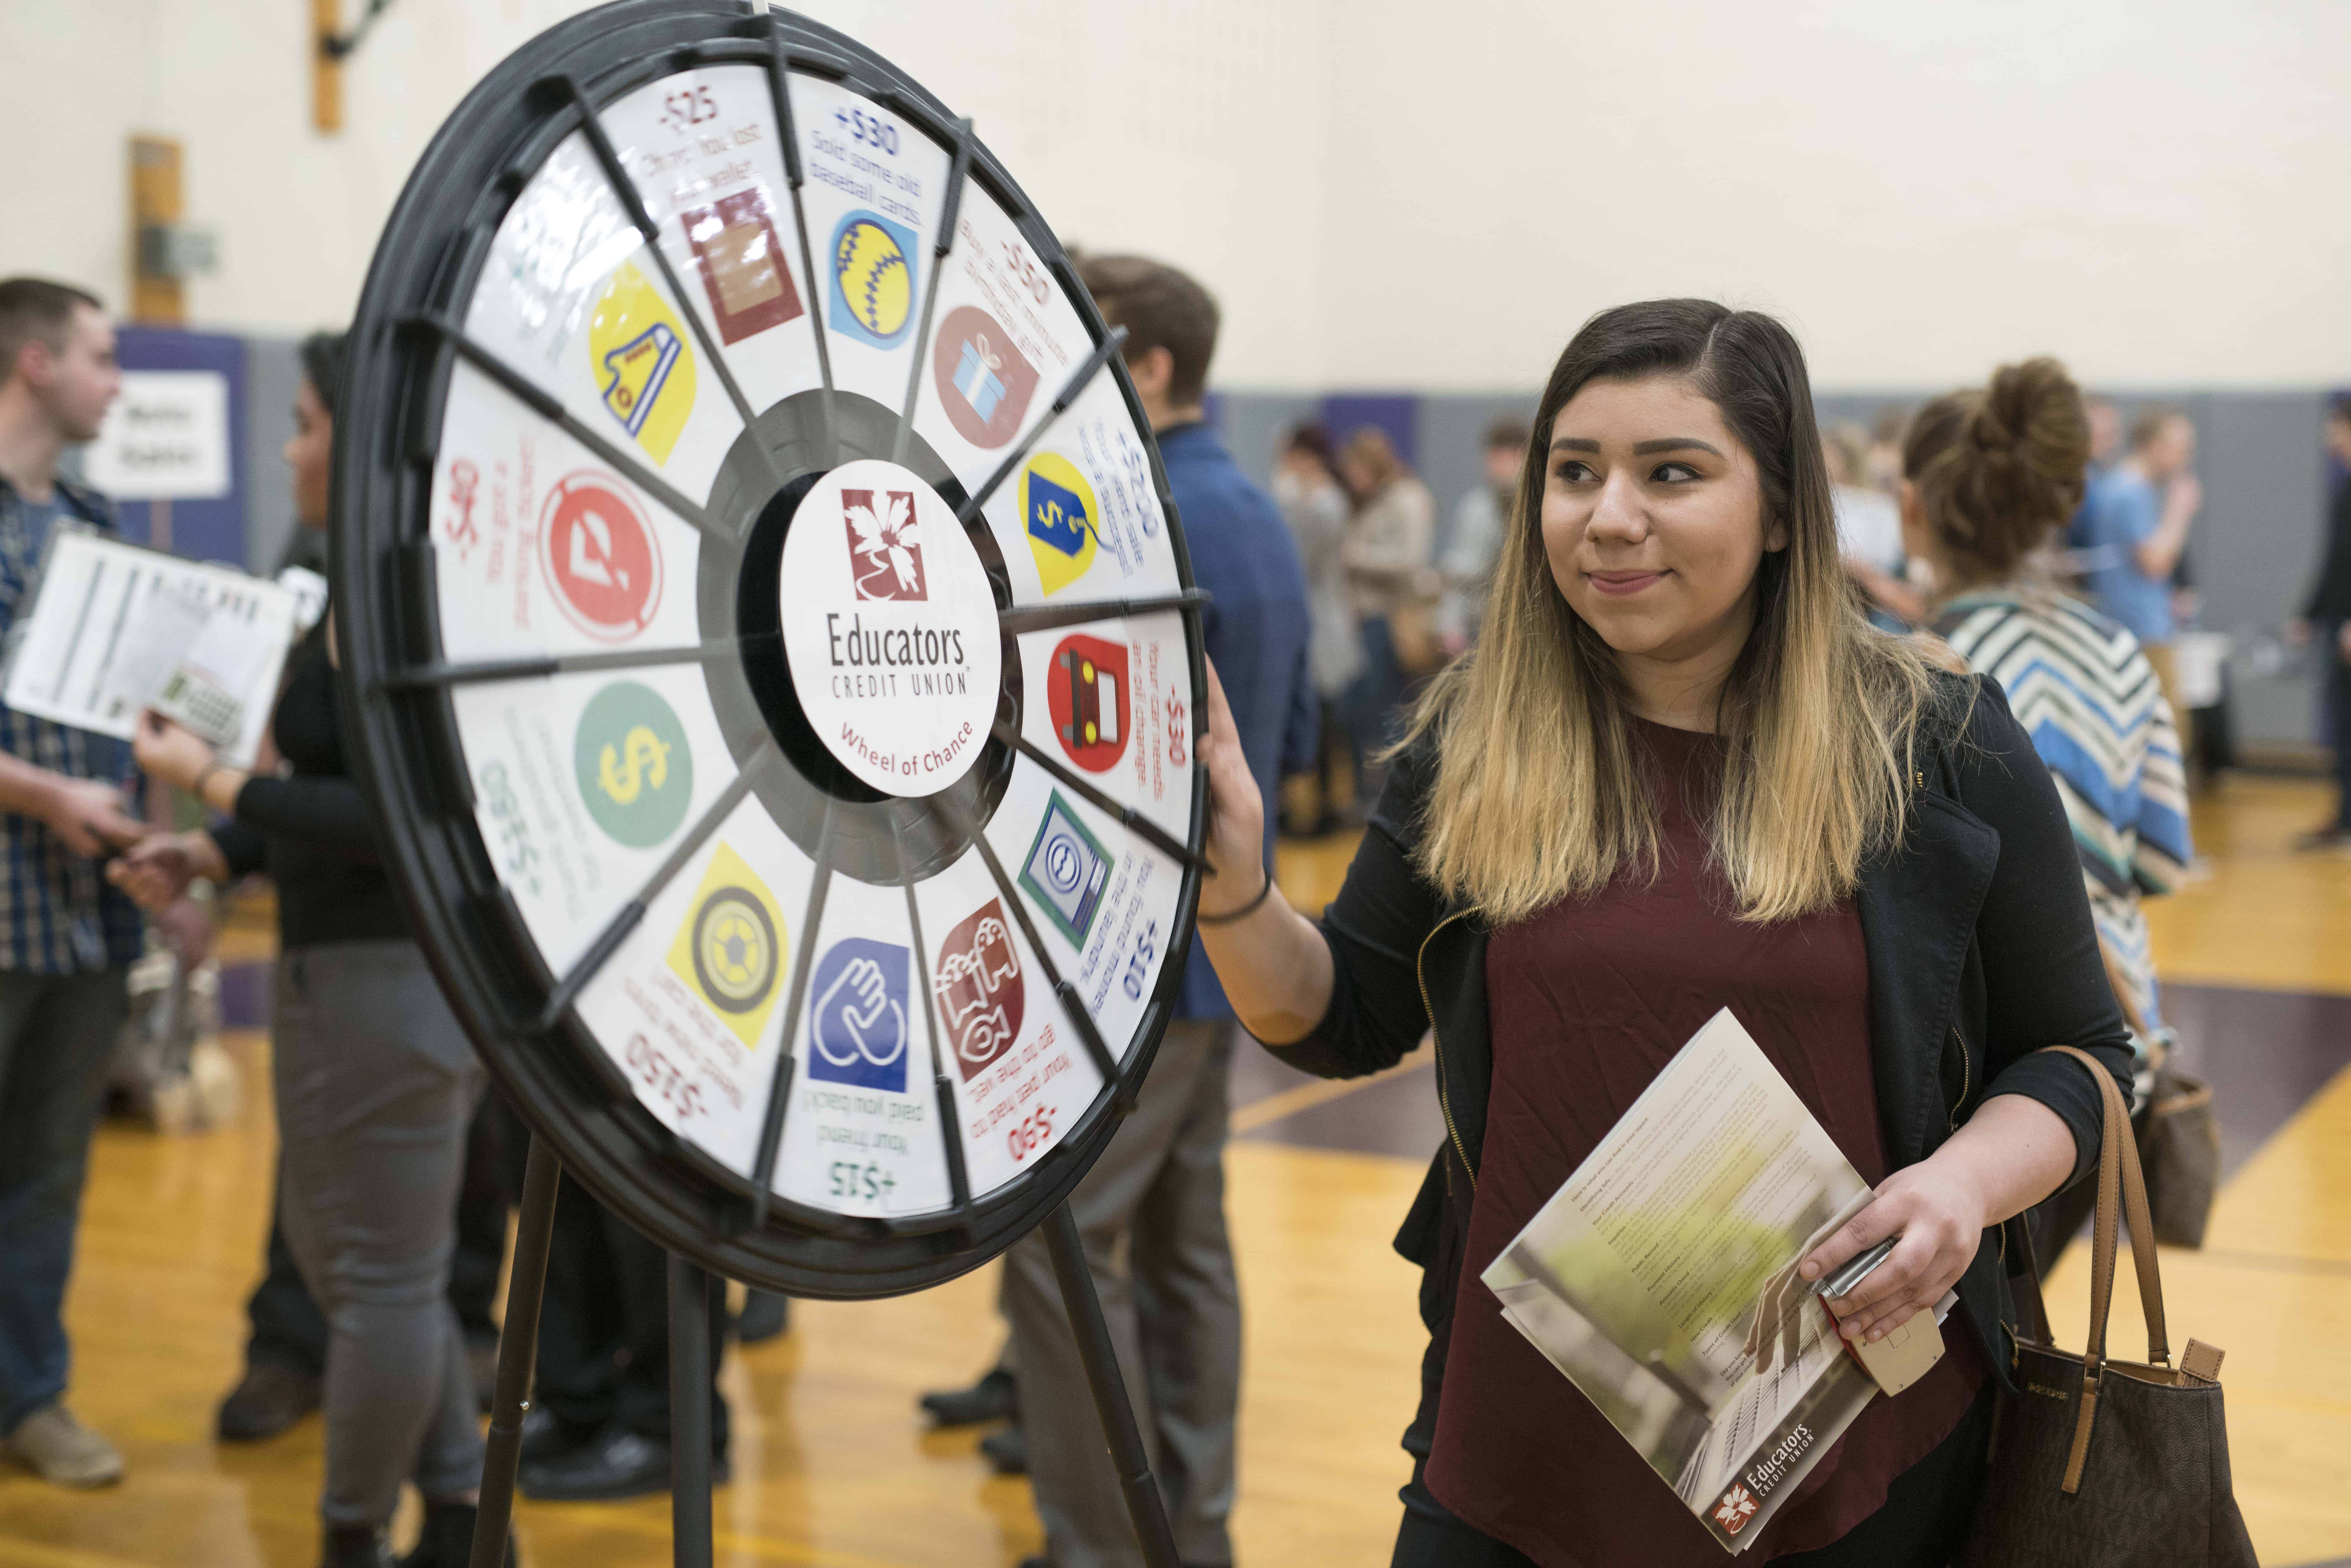 Reality Check Day student from Cudahy High School spinning the wheel of fate